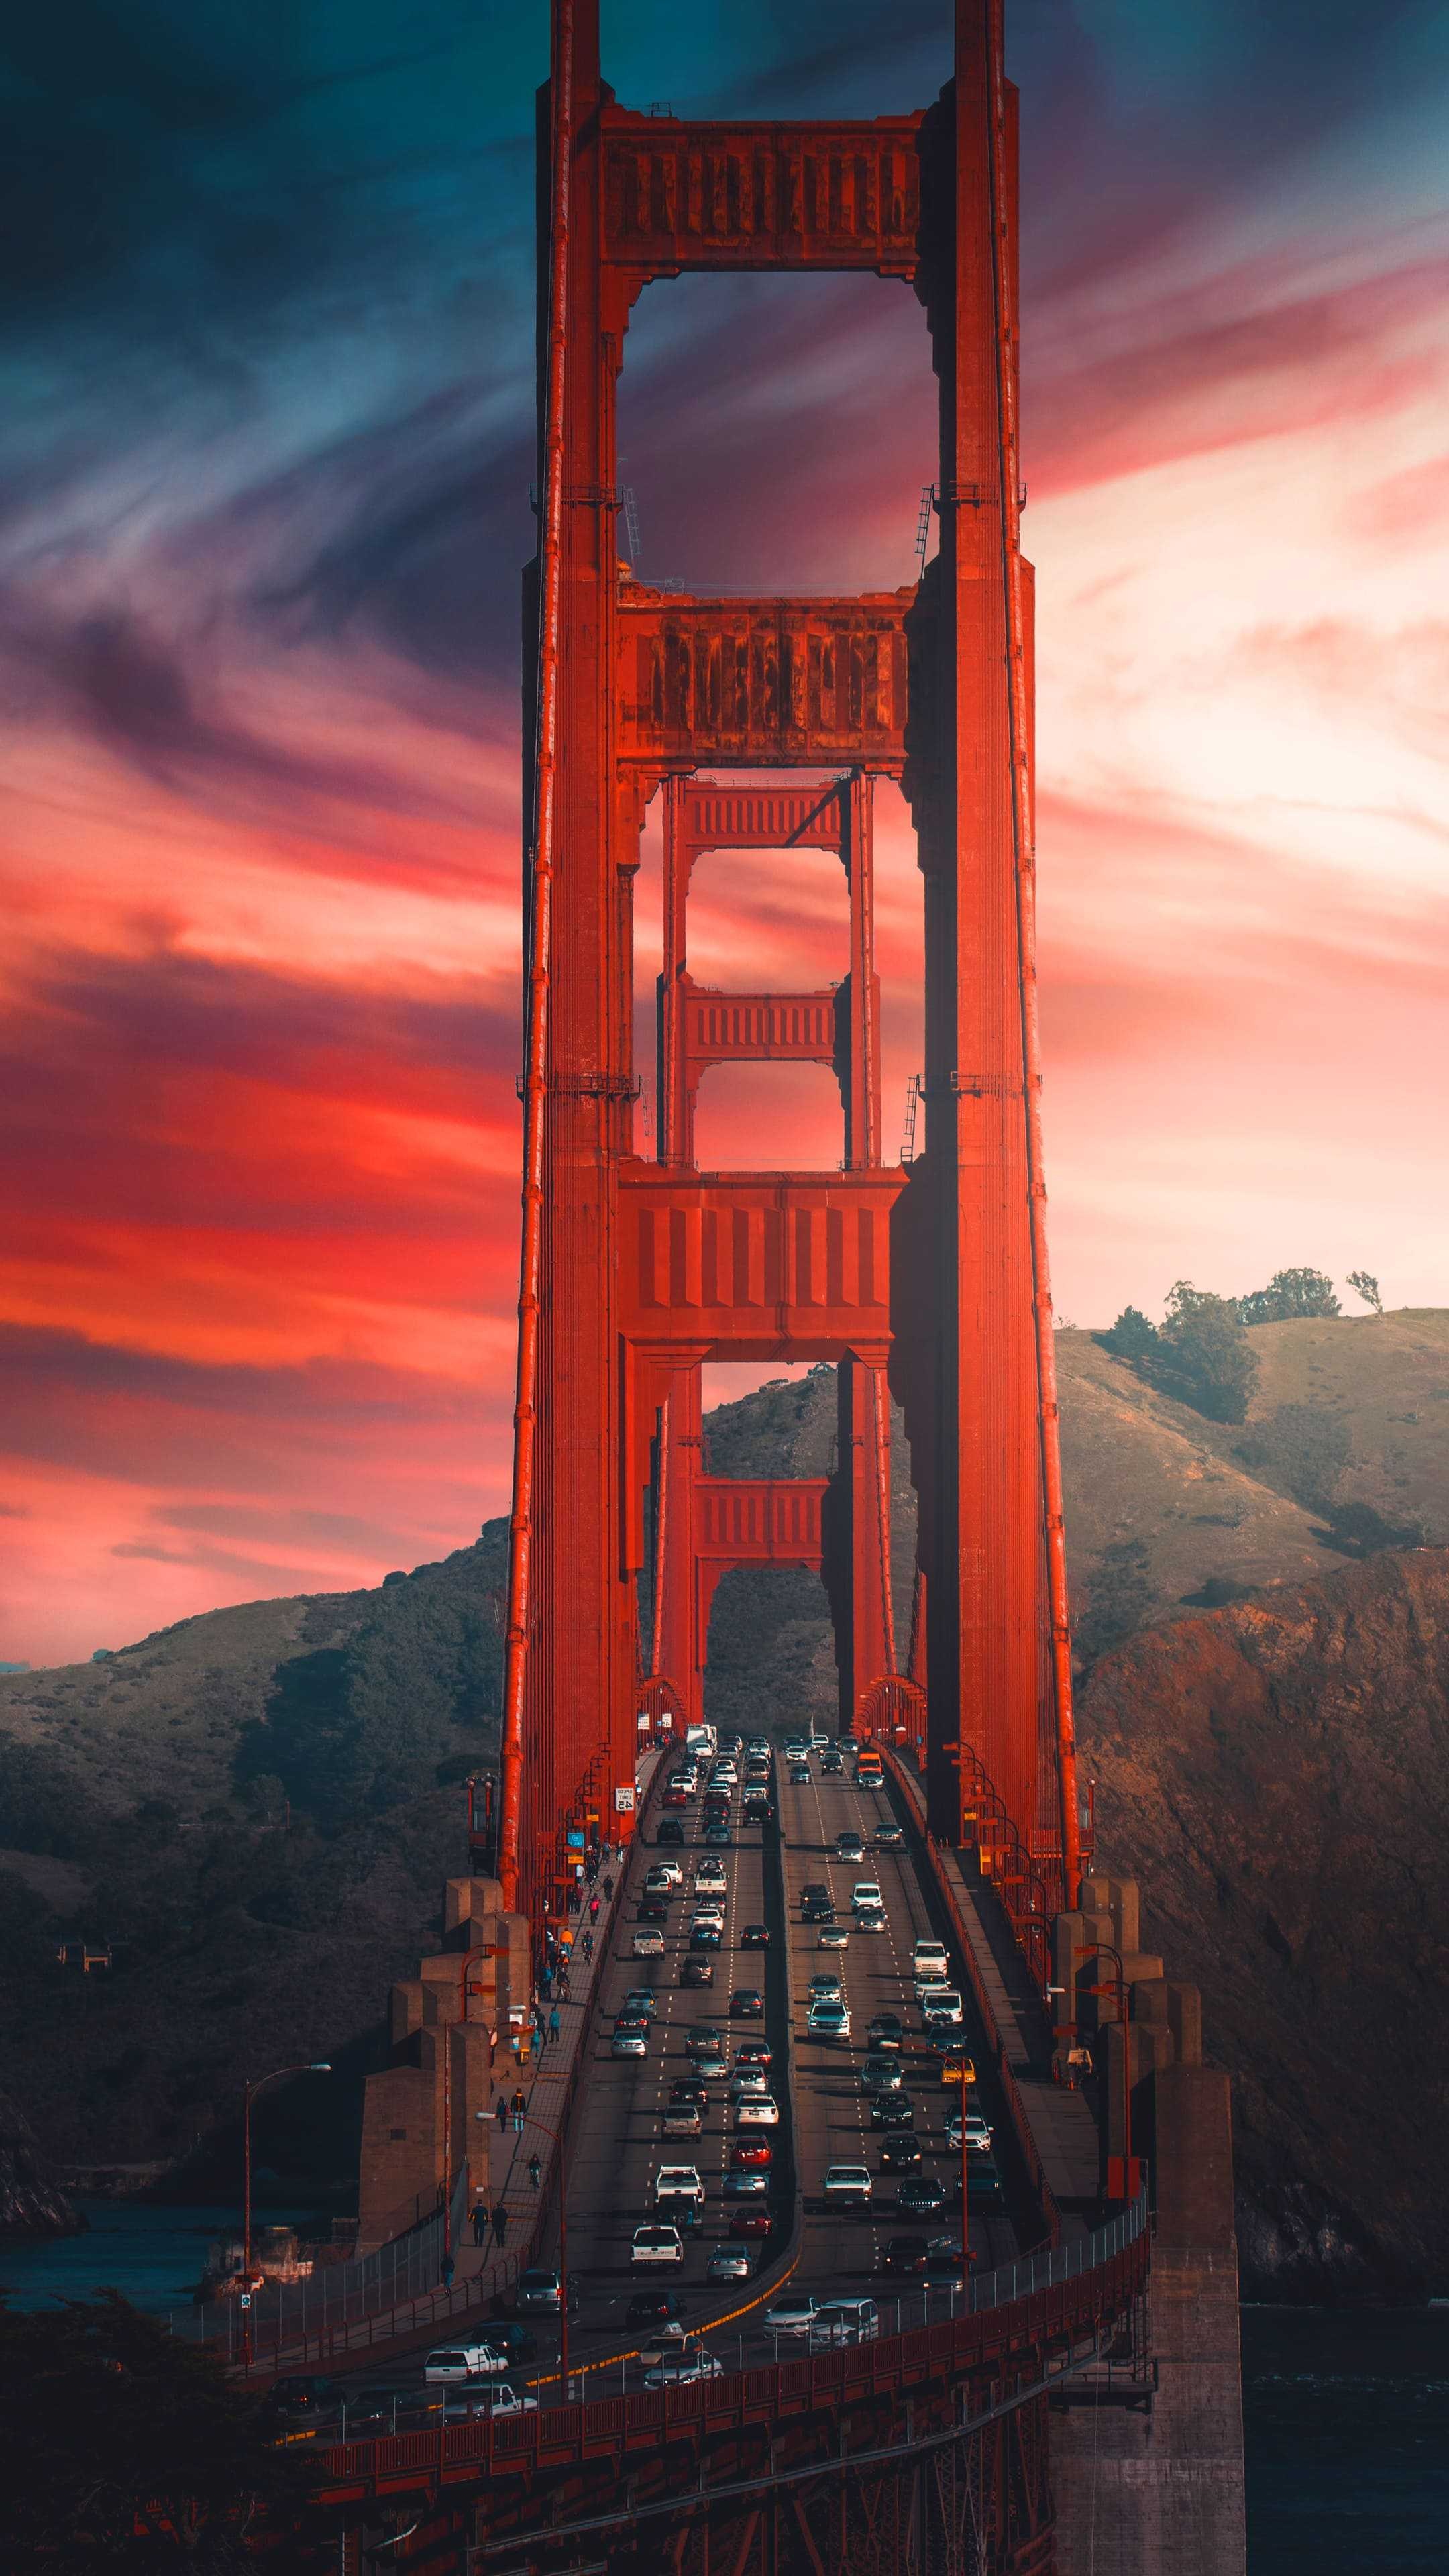 Bridge: The Golden Gate, Links the US city of San Francisco to Marin County. 2160x3840 4K Background.